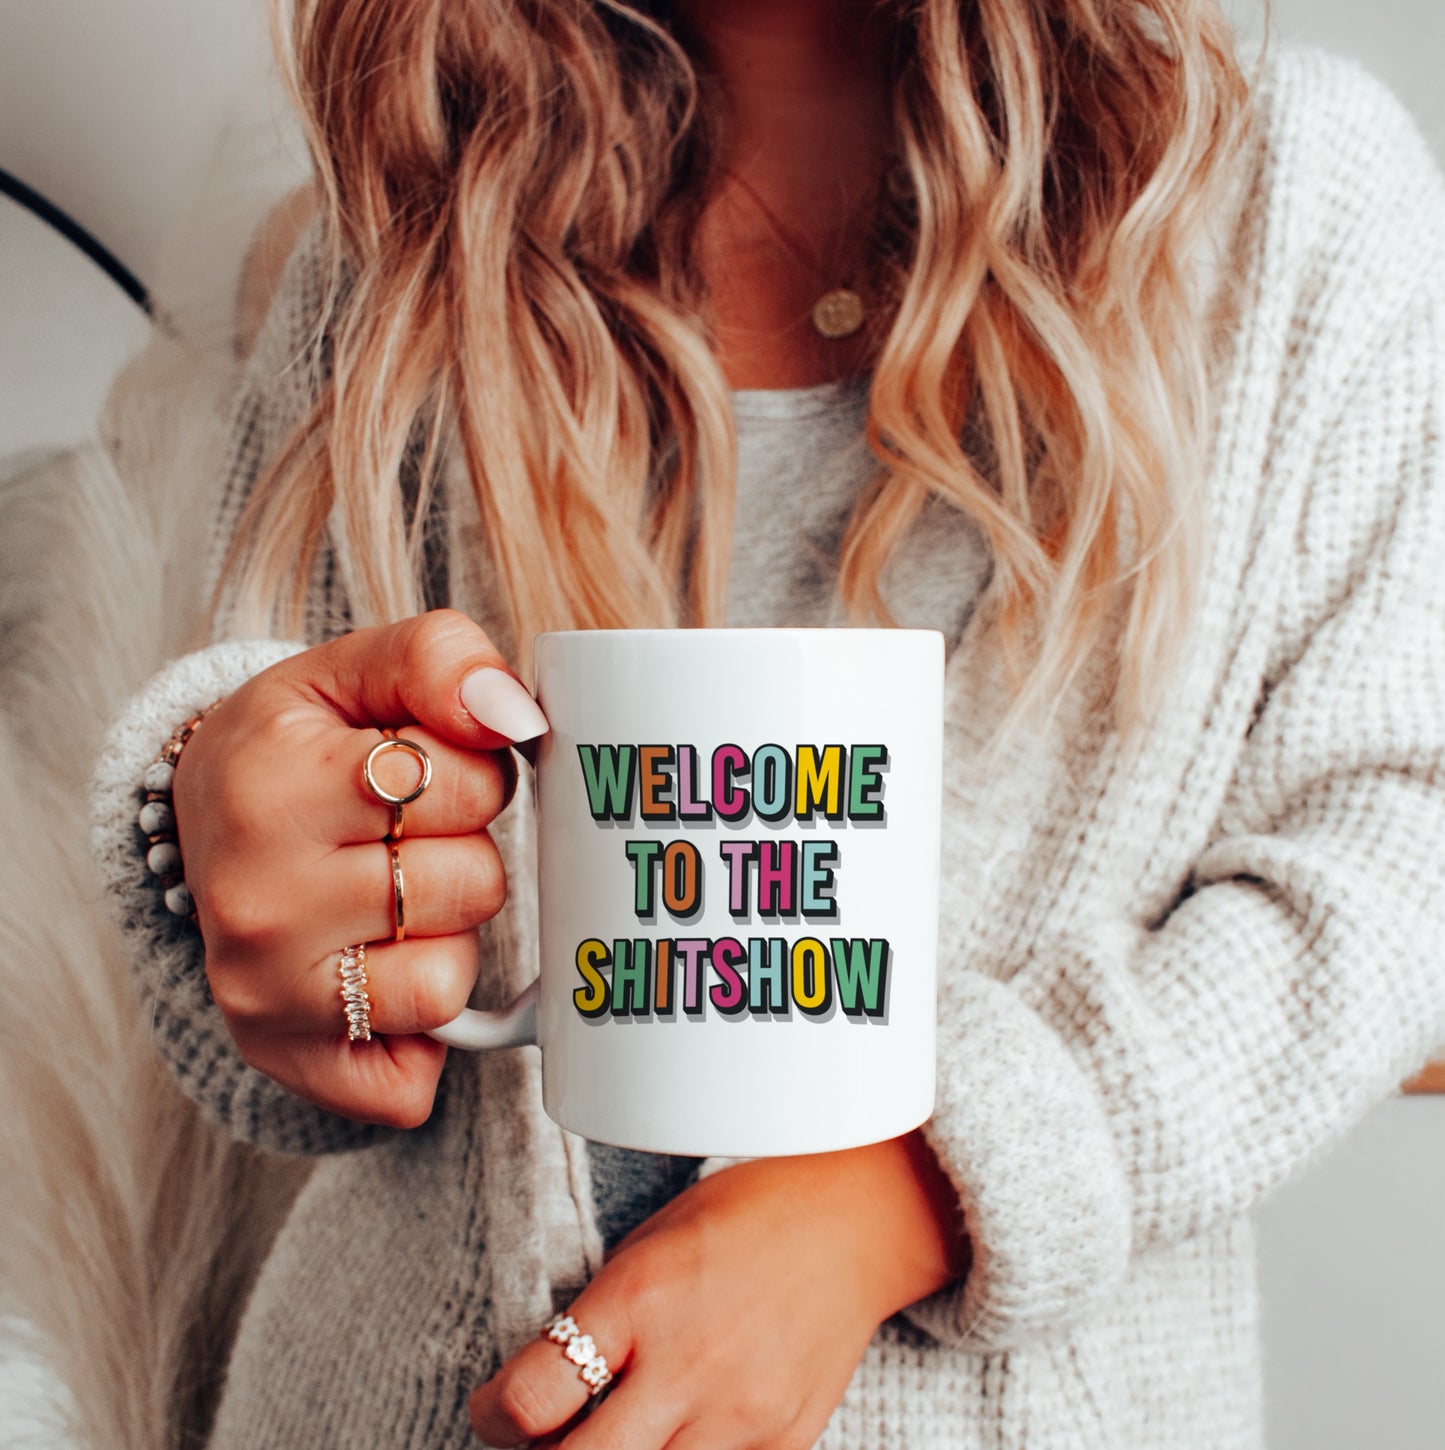  "Mug - 'Welcome to the Shitshow' design on white background, a humorous and honest companion for life's chaos."